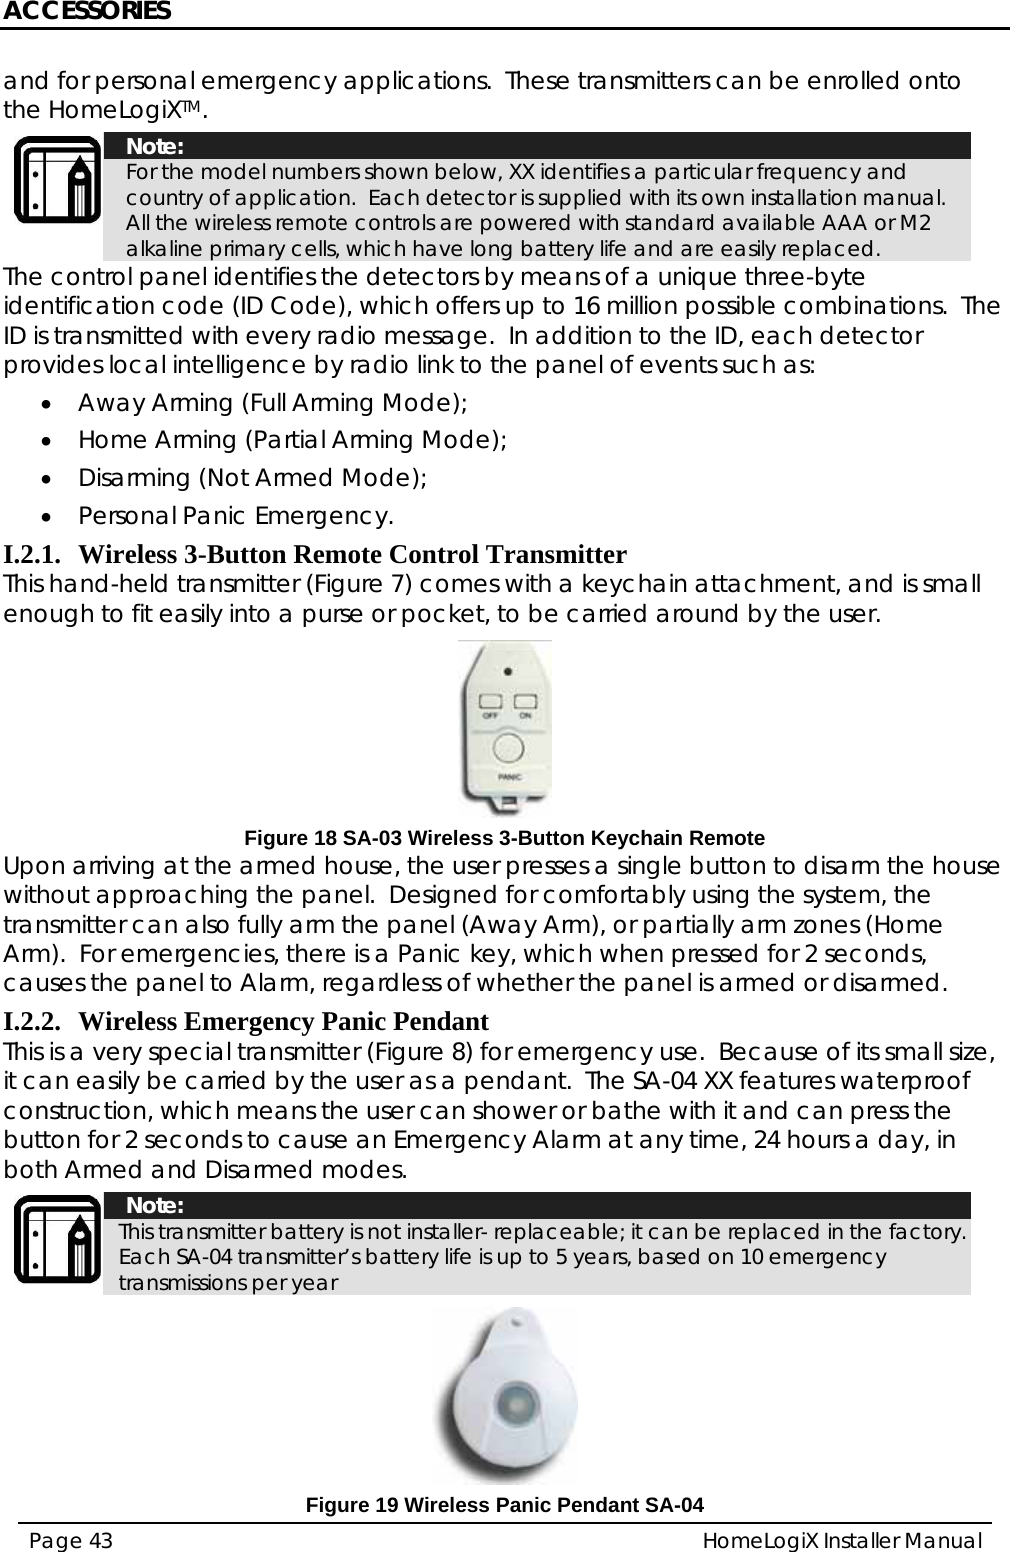 ACCESSORIES HomeLogiX Installer Manual Page 43  and for personal emergency applications.  These transmitters can be enrolled onto the HomeLogiXTM.  Note: For the model numbers shown below, XX identifies a particular frequency and country of application.  Each detector is supplied with its own installation manual.  All the wireless remote controls are powered with standard available AAA or M2 alkaline primary cells, which have long battery life and are easily replaced. The control panel identifies the detectors by means of a unique three-byte identification code (ID Code), which offers up to 16 million possible combinations.  The ID is transmitted with every radio message.  In addition to the ID, each detector provides local intelligence by radio link to the panel of events such as: • Away Arming (Full Arming Mode); • Home Arming (Partial Arming Mode); • Disarming (Not Armed Mode); • Personal Panic Emergency. I.2.1. Wireless 3-Button Remote Control Transmitter This hand-held transmitter (Figure 7) comes with a keychain attachment, and is small enough to fit easily into a purse or pocket, to be carried around by the user.  Figure 18 SA-03 Wireless 3-Button Keychain Remote Upon arriving at the armed house, the user presses a single button to disarm the house without approaching the panel.  Designed for comfortably using the system, the transmitter can also fully arm the panel (Away Arm), or partially arm zones (Home Arm).  For emergencies, there is a Panic key, which when pressed for 2 seconds, causes the panel to Alarm, regardless of whether the panel is armed or disarmed. I.2.2. Wireless Emergency Panic Pendant   This is a very special transmitter (Figure 8) for emergency use.  Because of its small size, it can easily be carried by the user as a pendant.  The SA-04 XX features waterproof construction, which means the user can shower or bathe with it and can press the button for 2 seconds to cause an Emergency Alarm at any time, 24 hours a day, in both Armed and Disarmed modes.  Note: This transmitter battery is not installer- replaceable; it can be replaced in the factory. Each SA-04 transmitter’s battery life is up to 5 years, based on 10 emergency transmissions per year   Figure 19 Wireless Panic Pendant SA-04 